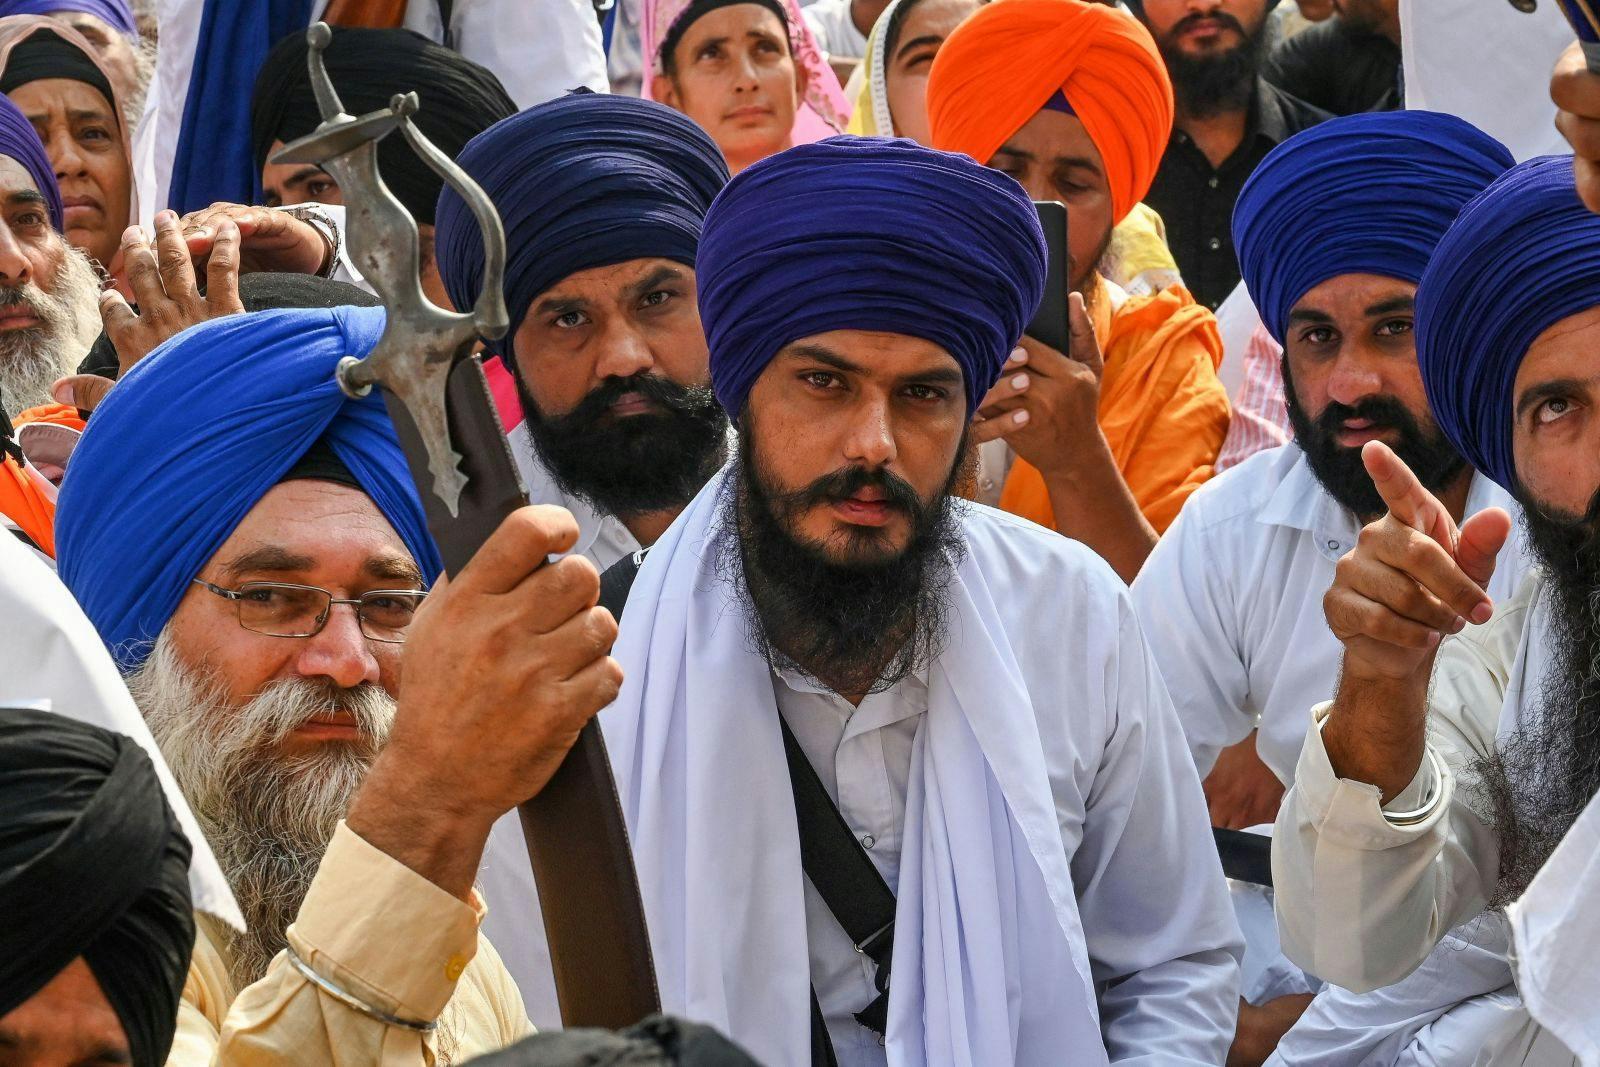 Amritpal Singh (C) along with devotees takes part in a Sikh initiation rite ceremony also known as Amrit Sanskar at Akal Takht Sahib in the Golden Temple in Amritsar on October 30, 2022 (NARINDER NANU/AFP via Getty Images)
